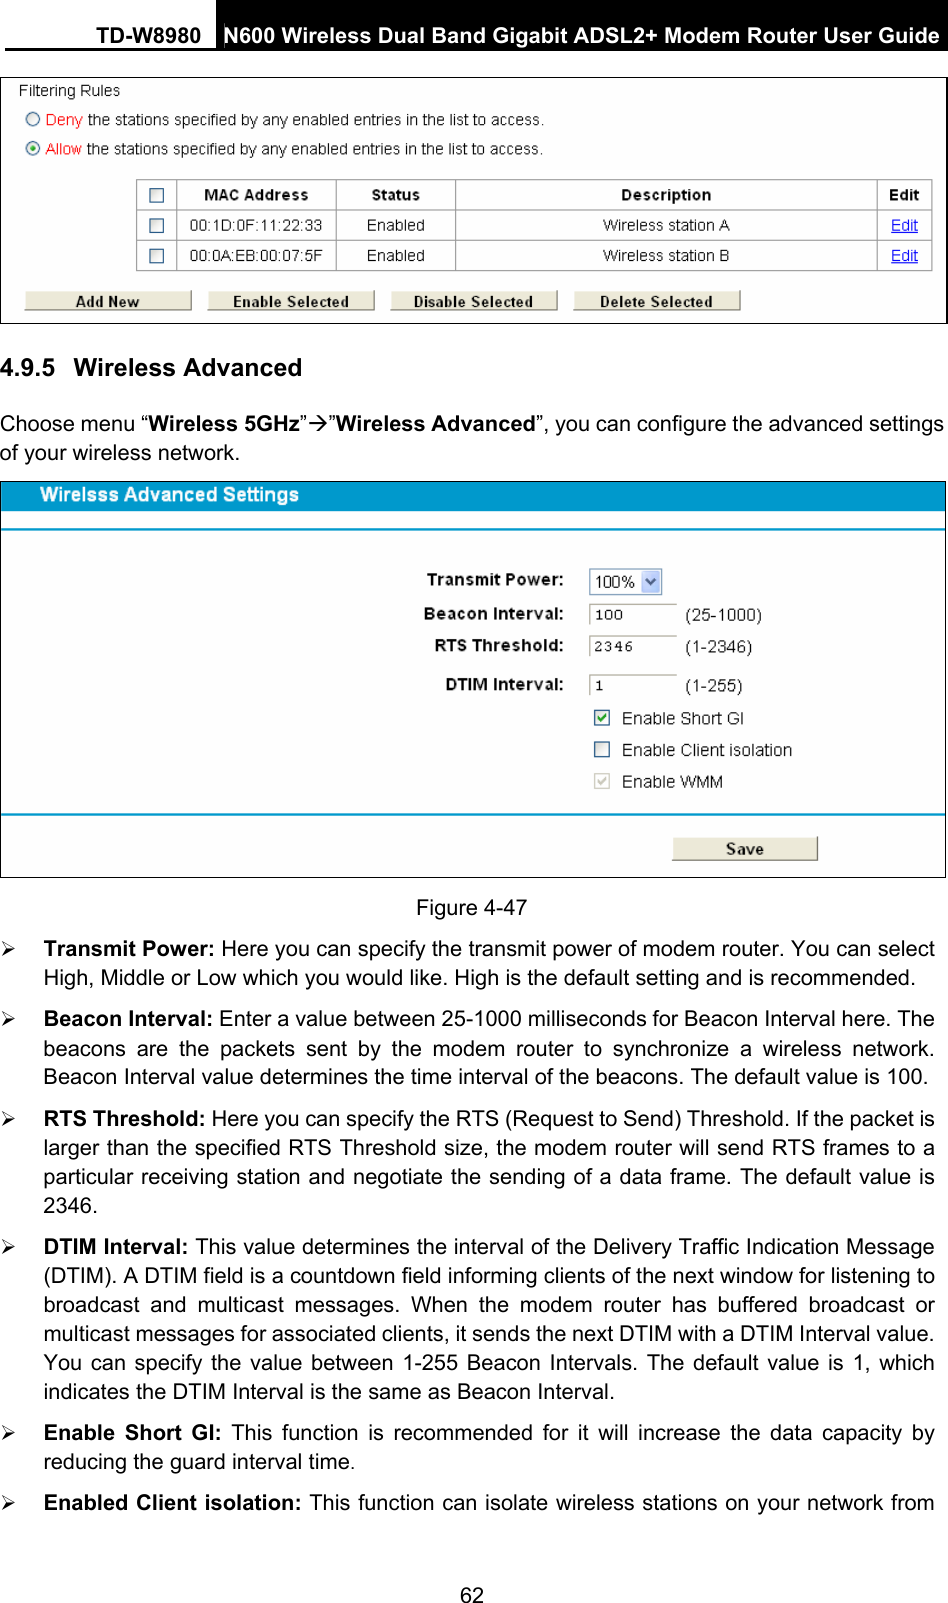 TD-W8980  N600 Wireless Dual Band Gigabit ADSL2+ Modem Router User Guide 62  4.9.5  Wireless Advanced Choose menu “Wireless 5GHz”Æ”Wireless Advanced”, you can configure the advanced settings of your wireless network.  Figure 4-47 ¾ Transmit Power: Here you can specify the transmit power of modem router. You can select High, Middle or Low which you would like. High is the default setting and is recommended. ¾ Beacon Interval: Enter a value between 25-1000 milliseconds for Beacon Interval here. The beacons are the packets sent by the modem router to synchronize a wireless network. Beacon Interval value determines the time interval of the beacons. The default value is 100.   ¾ RTS Threshold: Here you can specify the RTS (Request to Send) Threshold. If the packet is larger than the specified RTS Threshold size, the modem router will send RTS frames to a particular receiving station and negotiate the sending of a data frame. The default value is 2346.  ¾ DTIM Interval: This value determines the interval of the Delivery Traffic Indication Message (DTIM). A DTIM field is a countdown field informing clients of the next window for listening to broadcast and multicast messages. When the modem router has buffered broadcast or multicast messages for associated clients, it sends the next DTIM with a DTIM Interval value. You can specify the value between 1-255 Beacon Intervals. The default value is 1, which indicates the DTIM Interval is the same as Beacon Interval.   ¾ Enable Short GI: This function is recommended for it will increase the data capacity by reducing the guard interval time.  ¾ Enabled Client isolation: This function can isolate wireless stations on your network from 